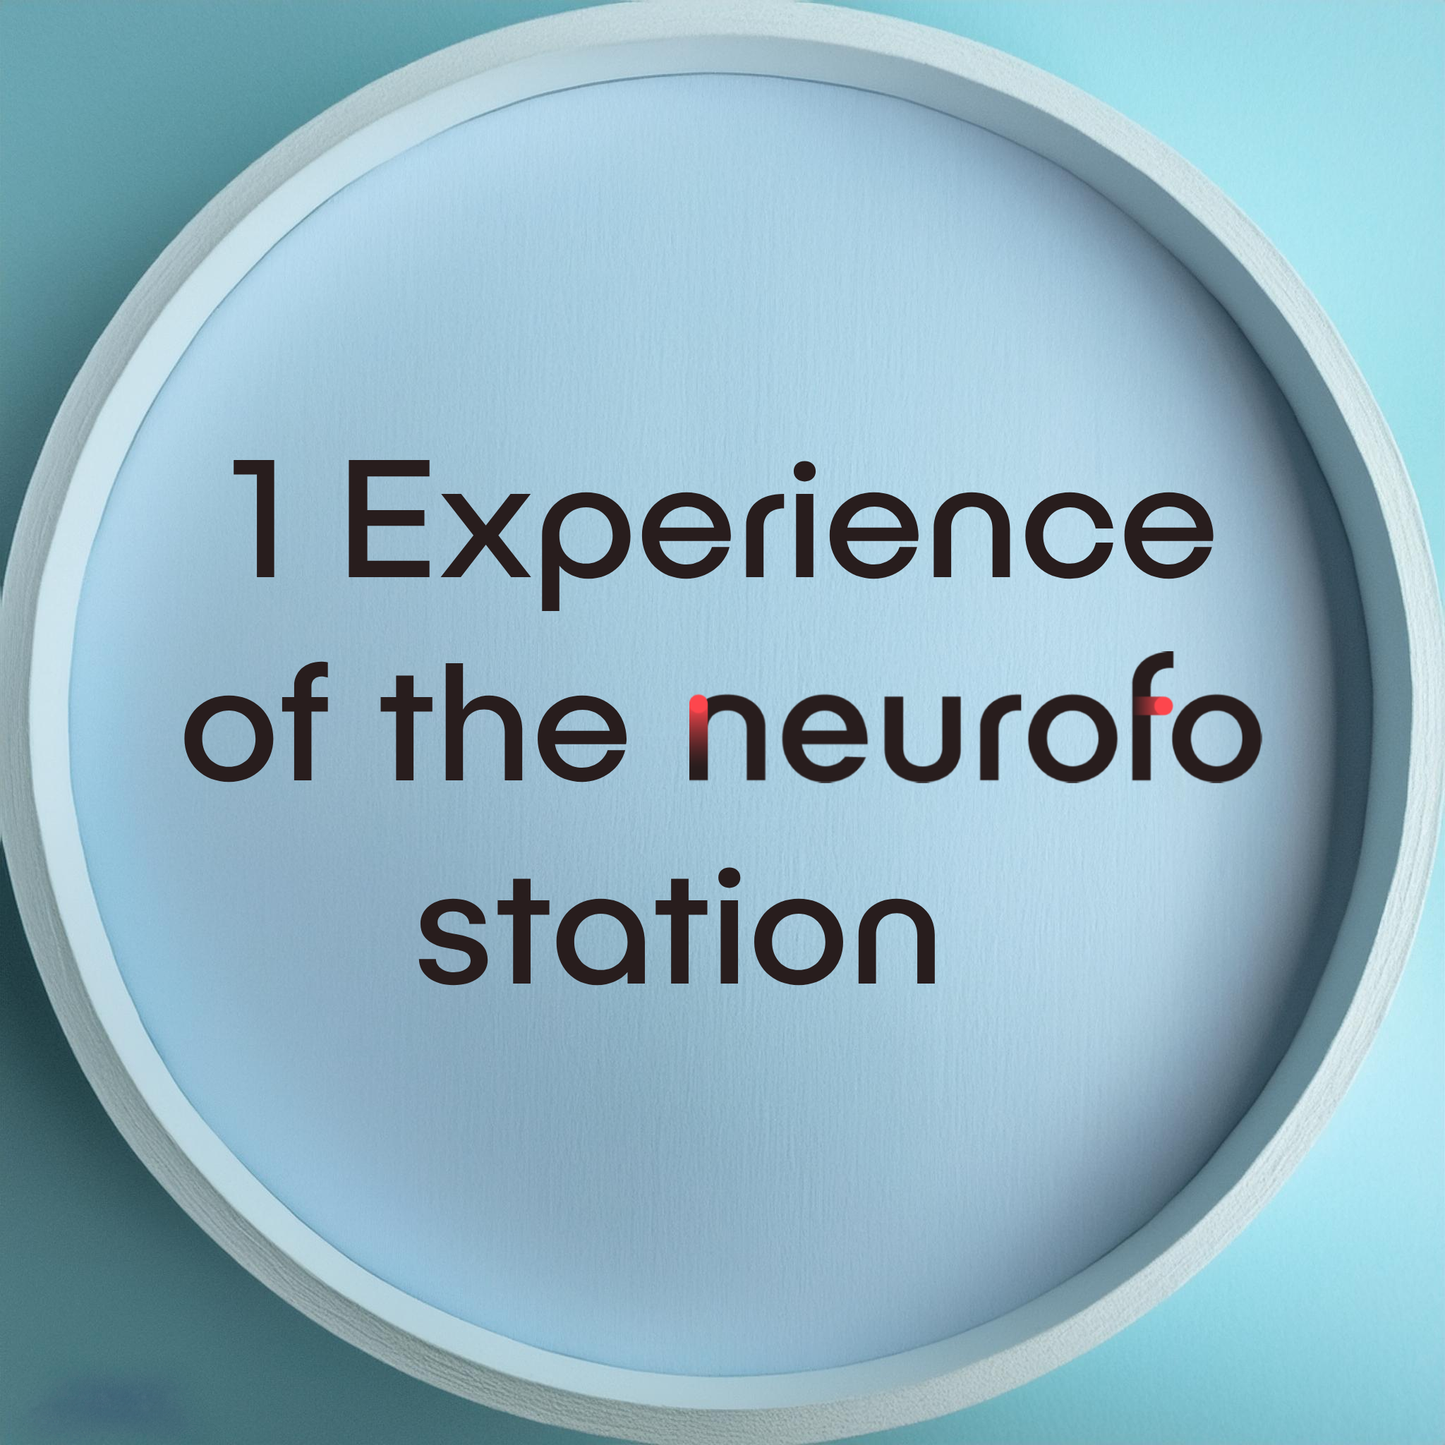 One experience of The Neuroforce Station